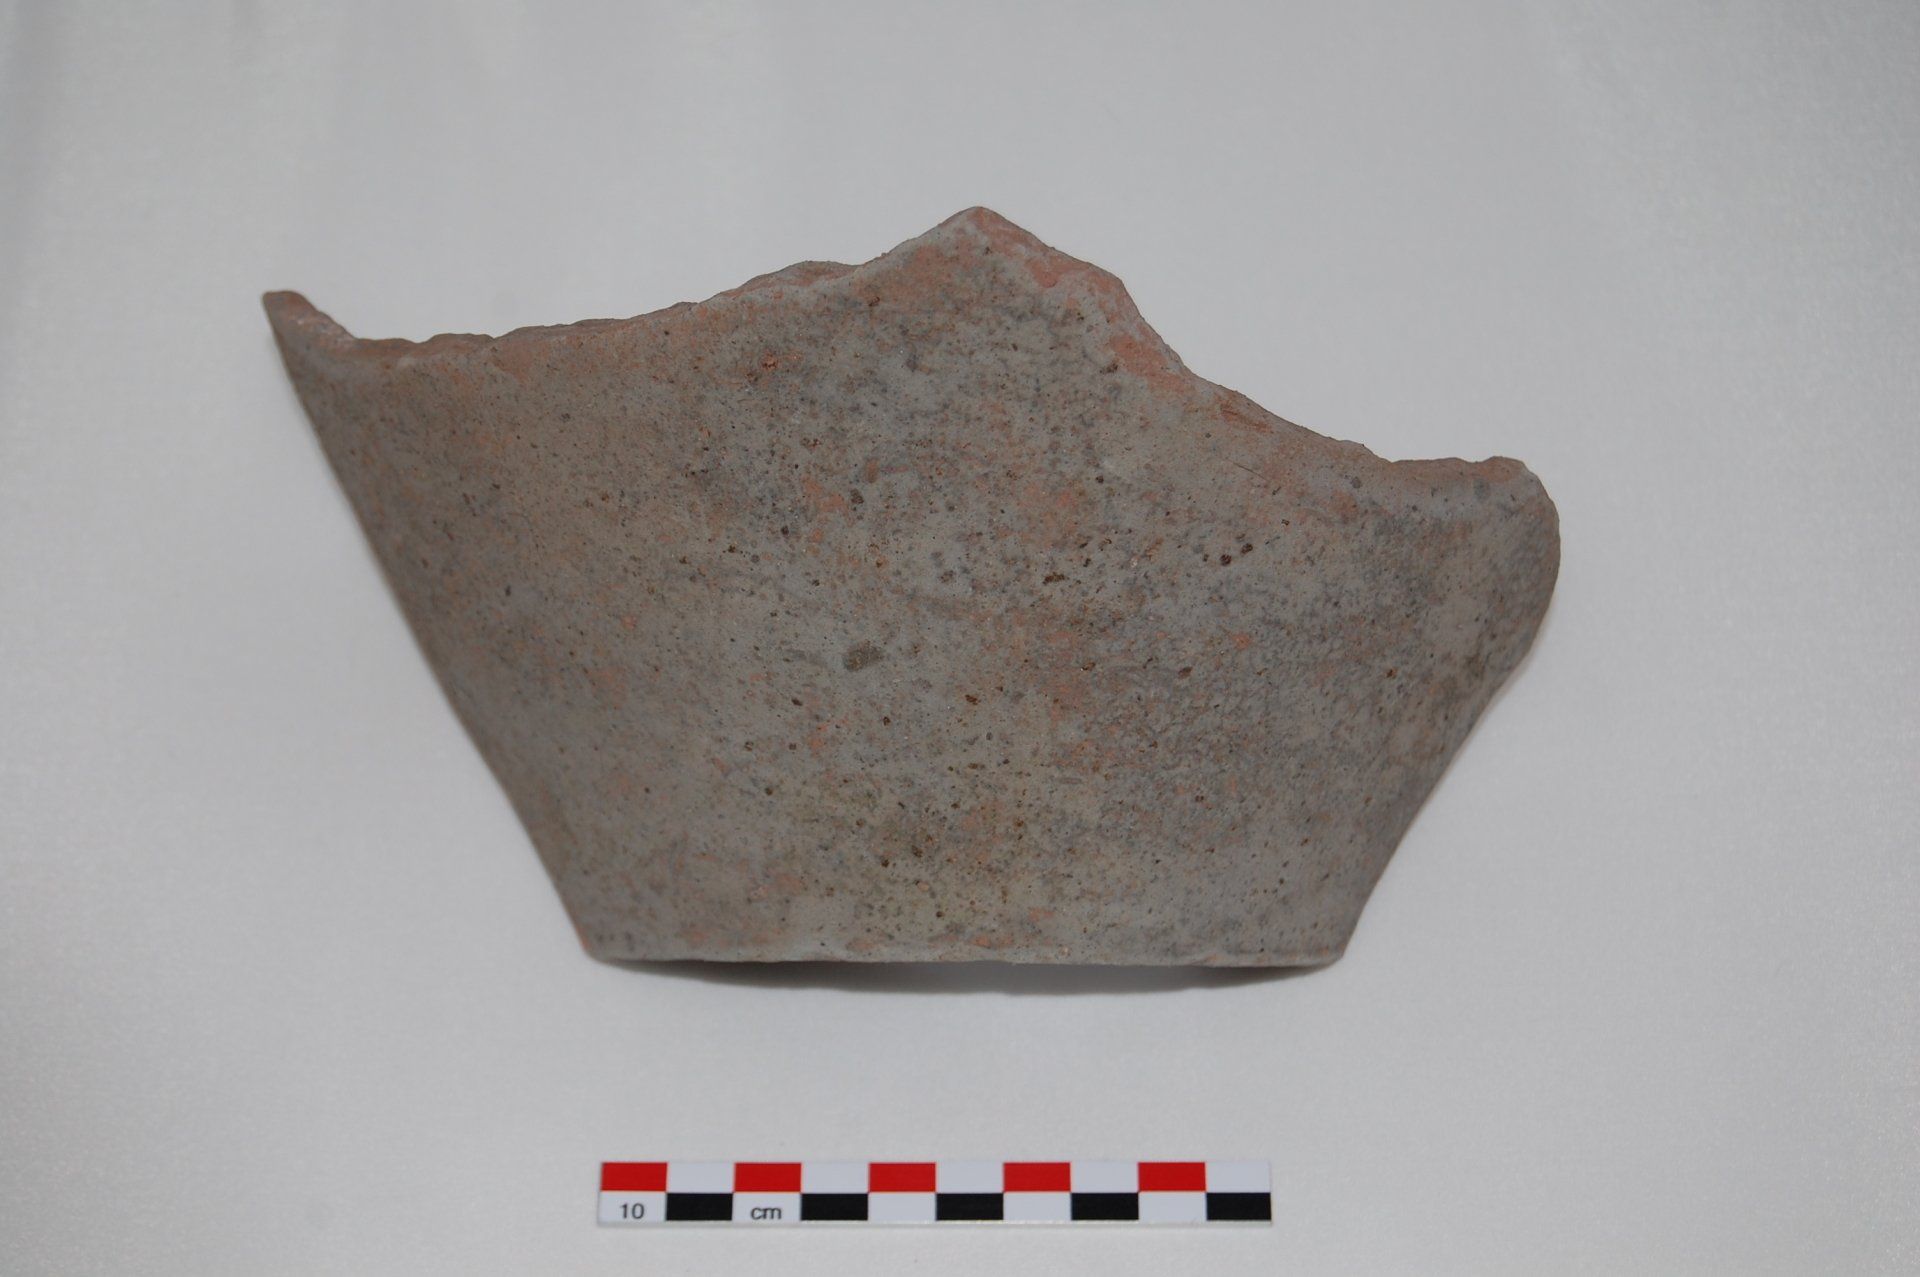 South Wales Grey Ware pottery from the cremation excavation